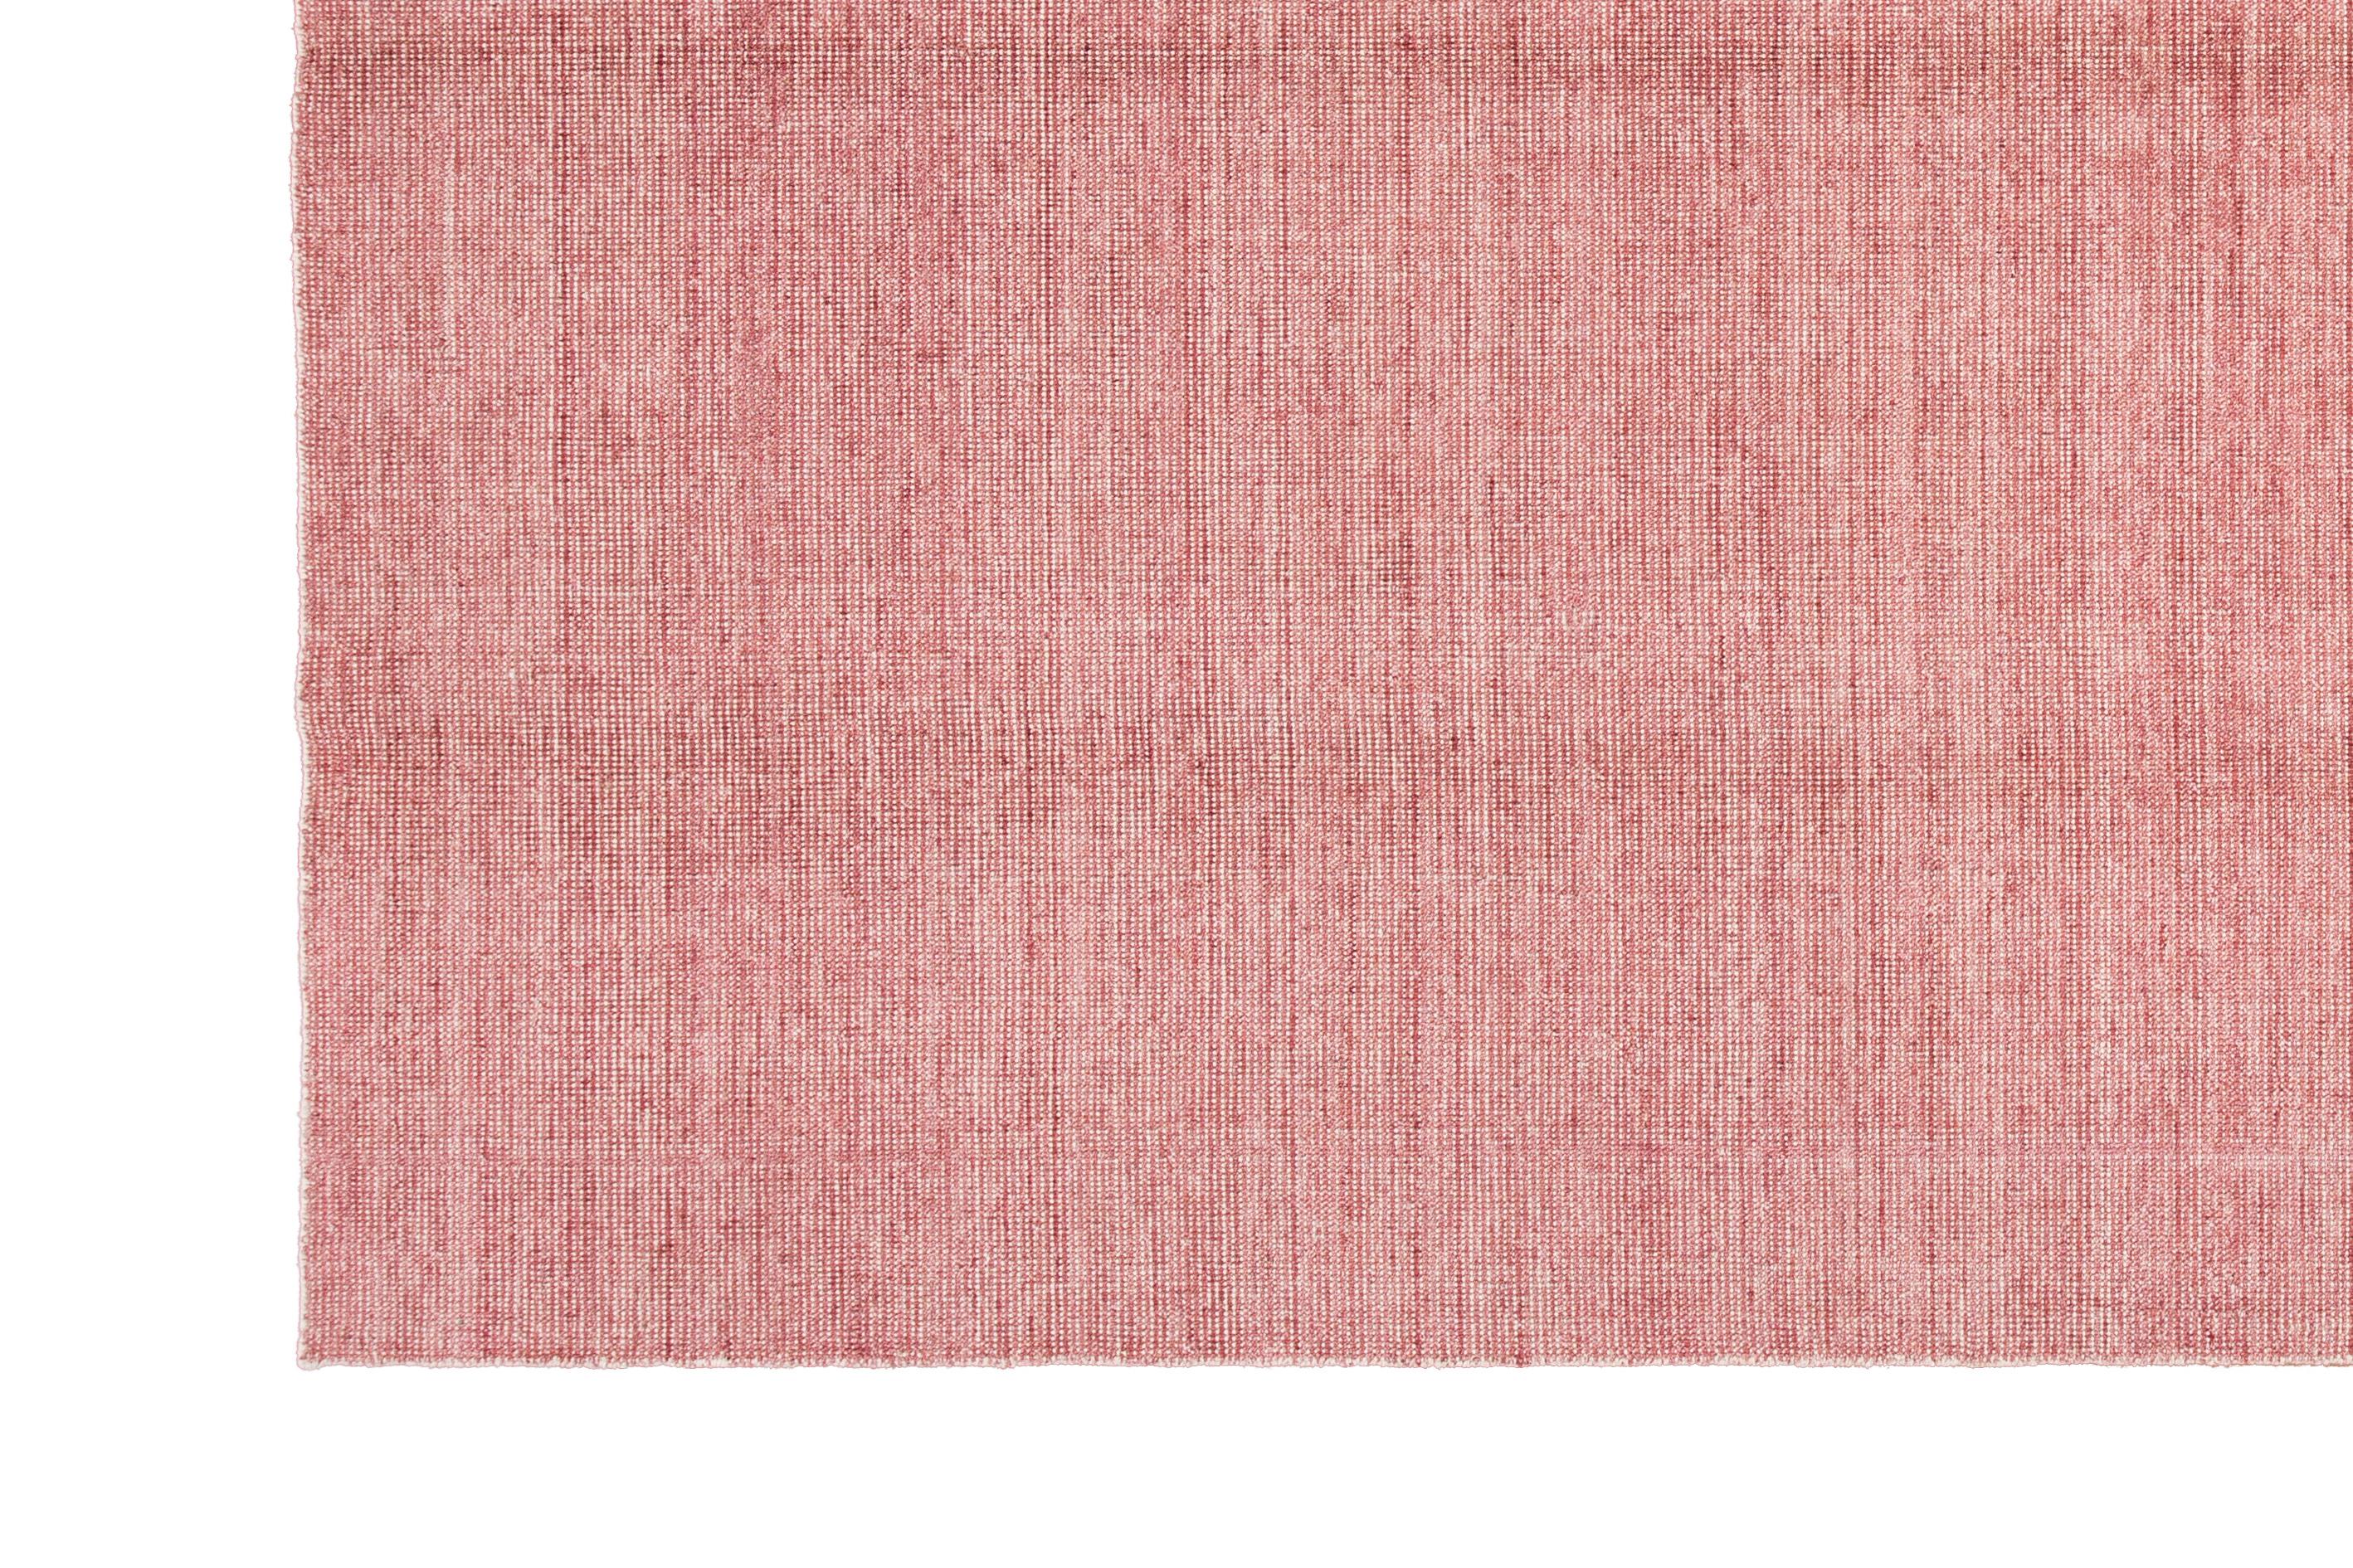 Beautiful modern handmade Indian bamboo and silk boho rug with a red and ivory field. This Boho collection Rug has an all-over solid design.

This rug measures: 9'0